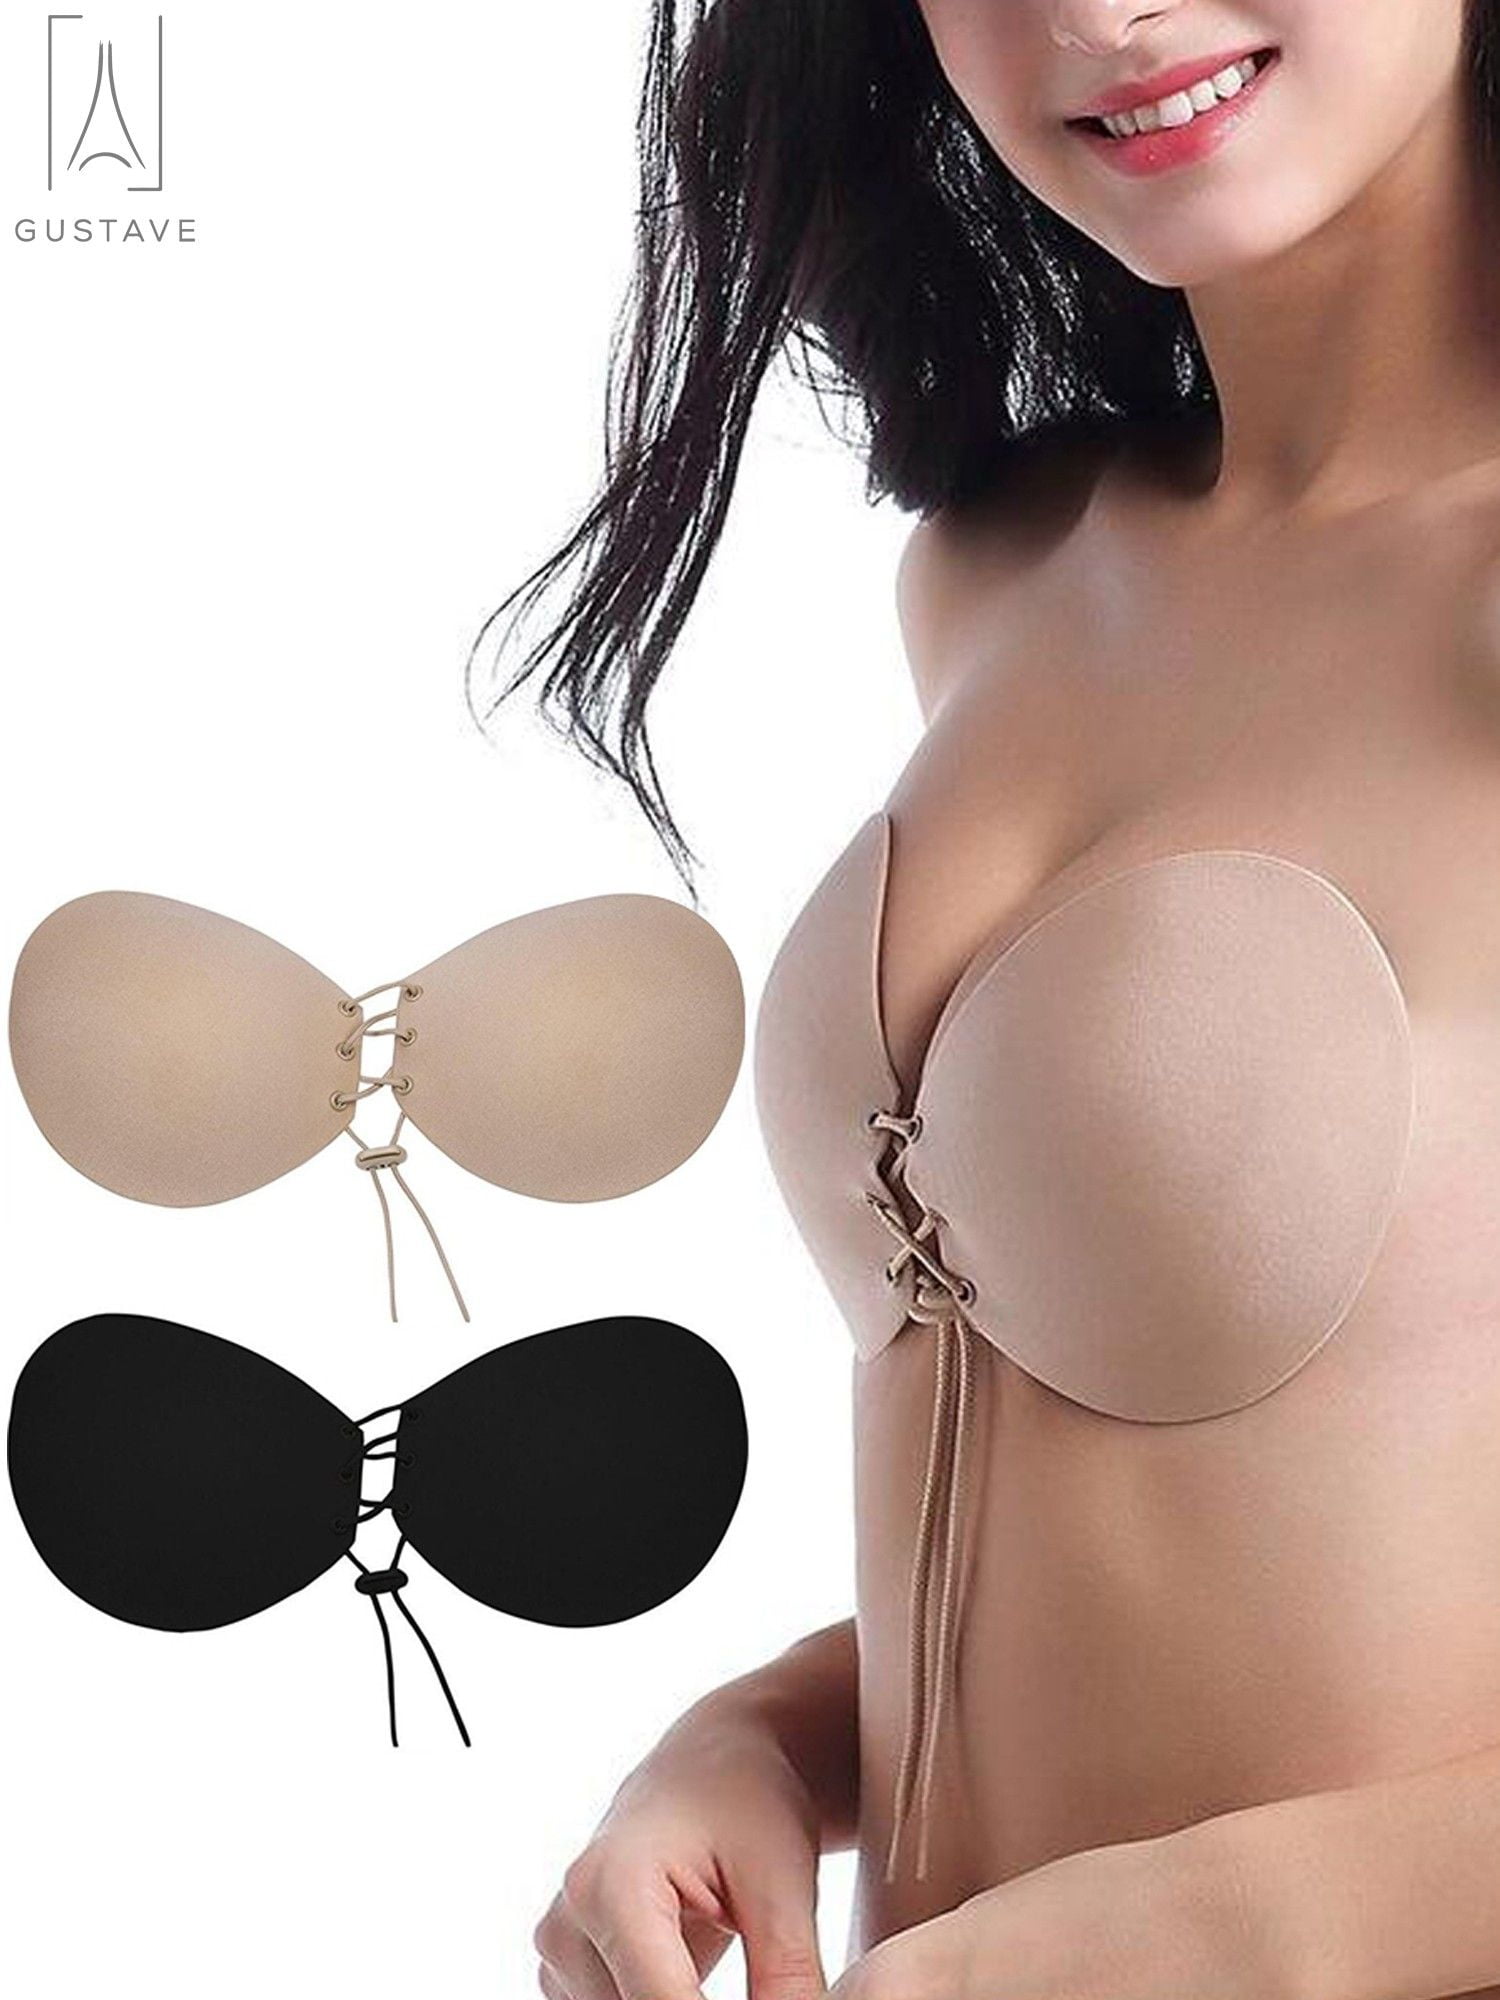 Gustavedesign Women's Strapless Backless Self Adhesive Bra Push Up Silicone  Invisible Bras with Drawstring Suit For Dress Wedding Party B Cup, Nude 